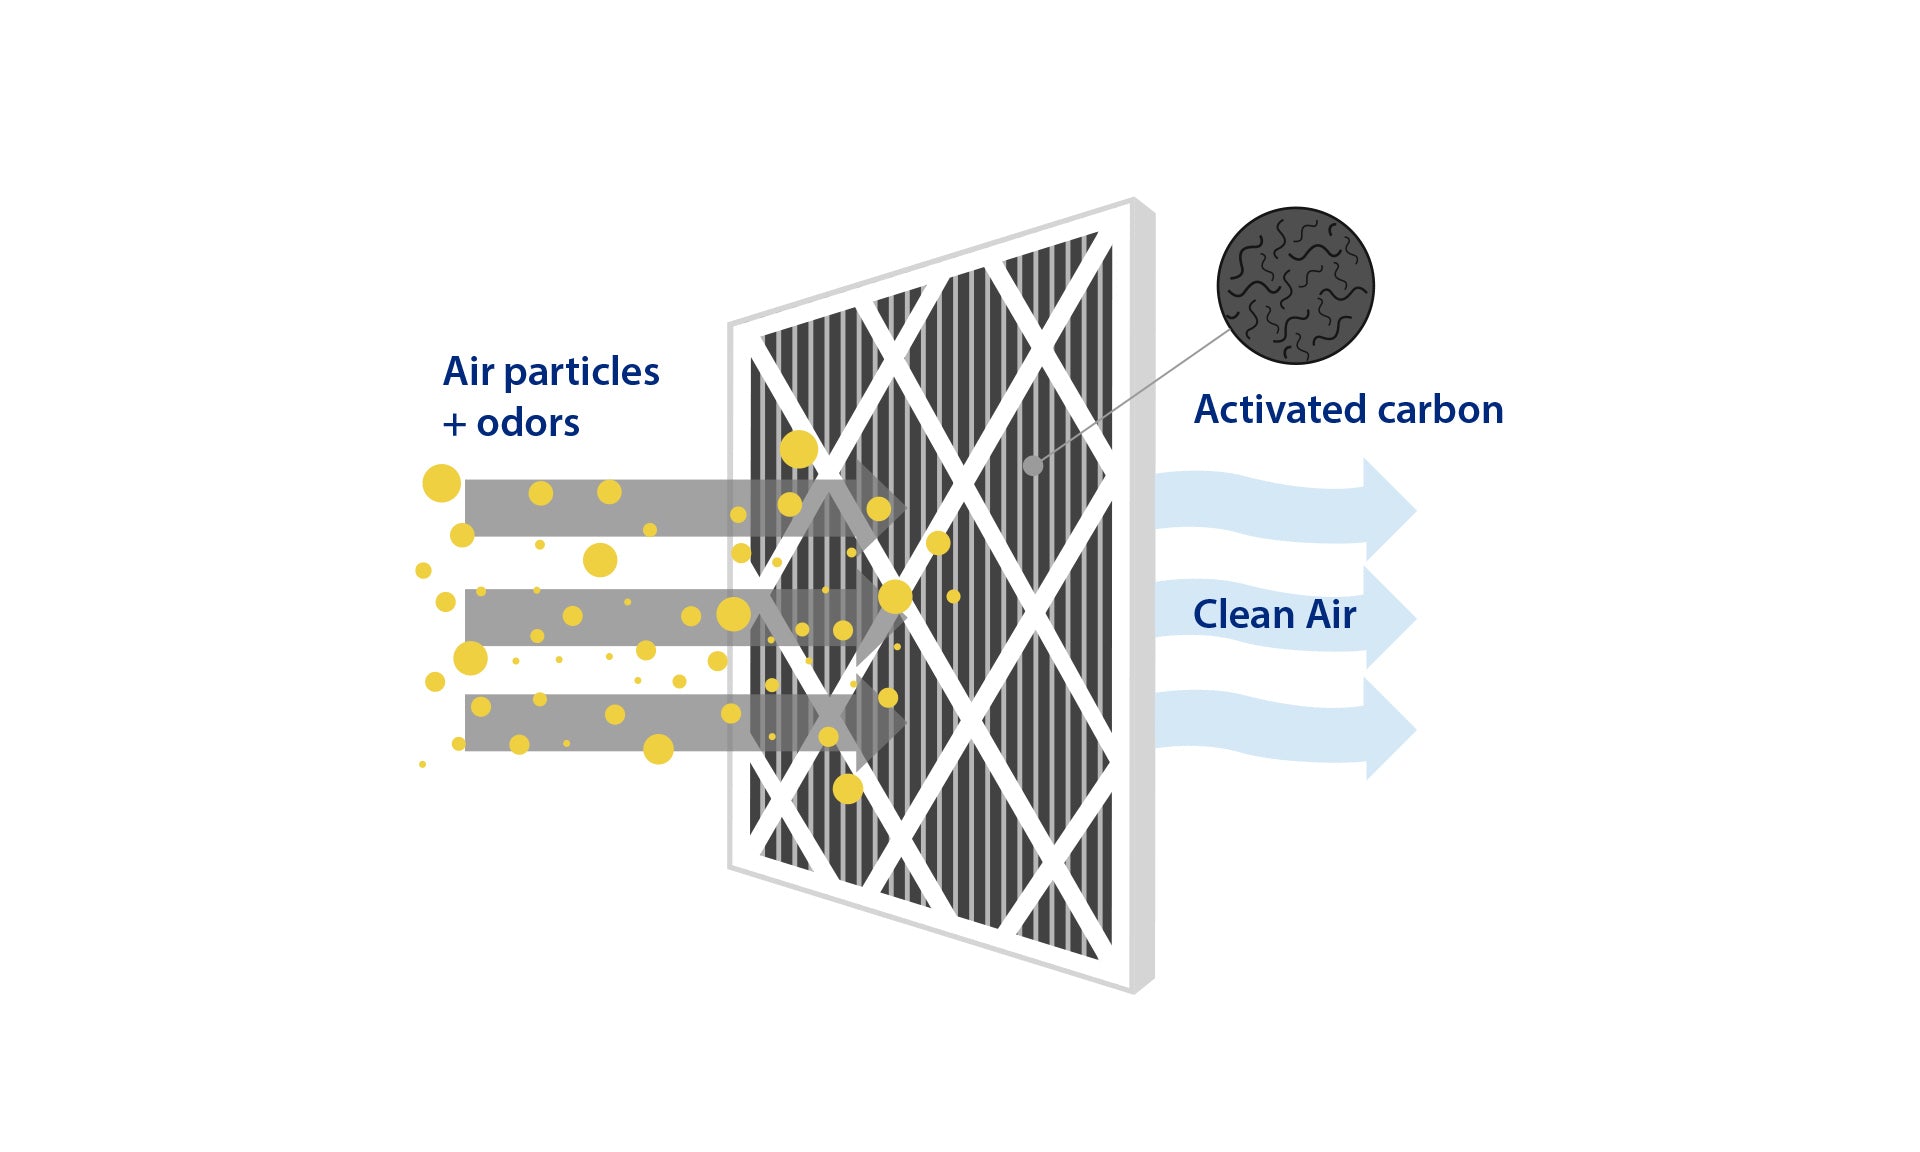 The functioning of activated carbon/charcoal filters and its usage or application across categories